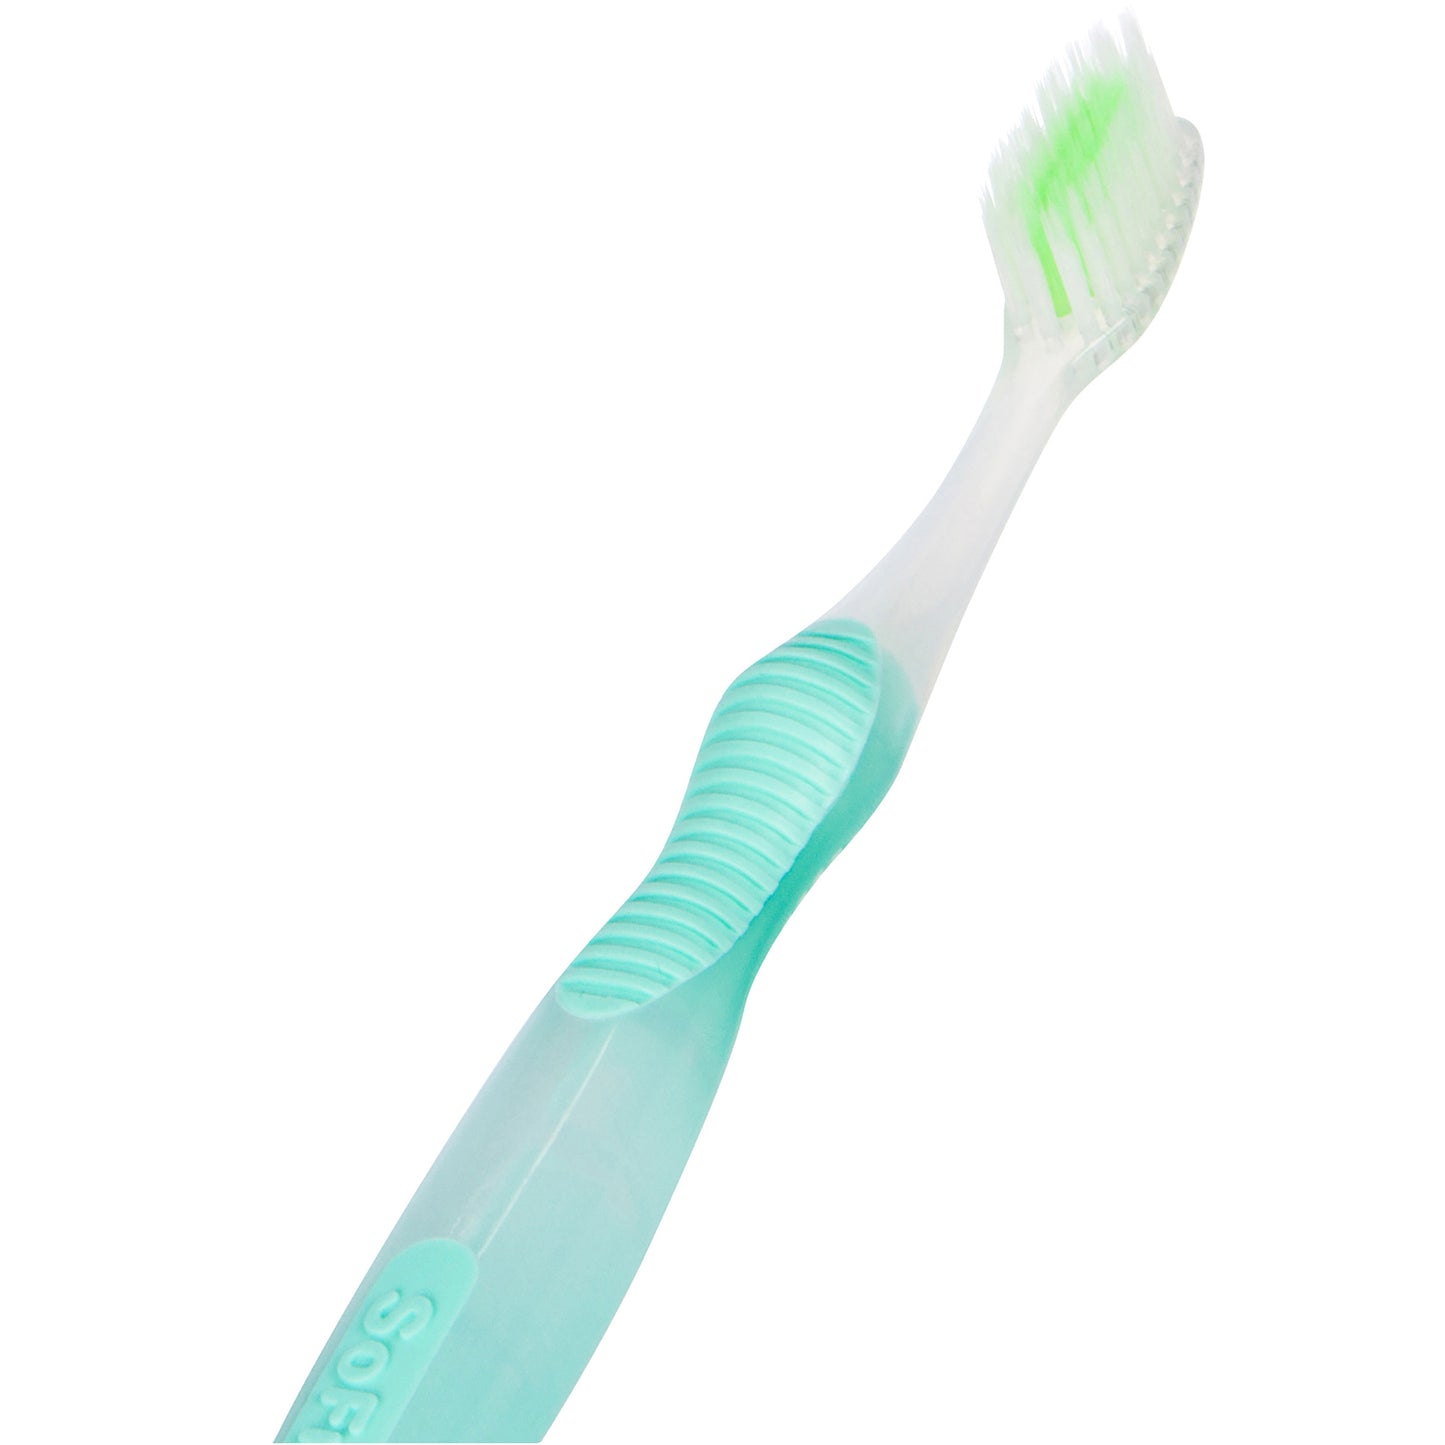 Adult Flossing Toothbrush